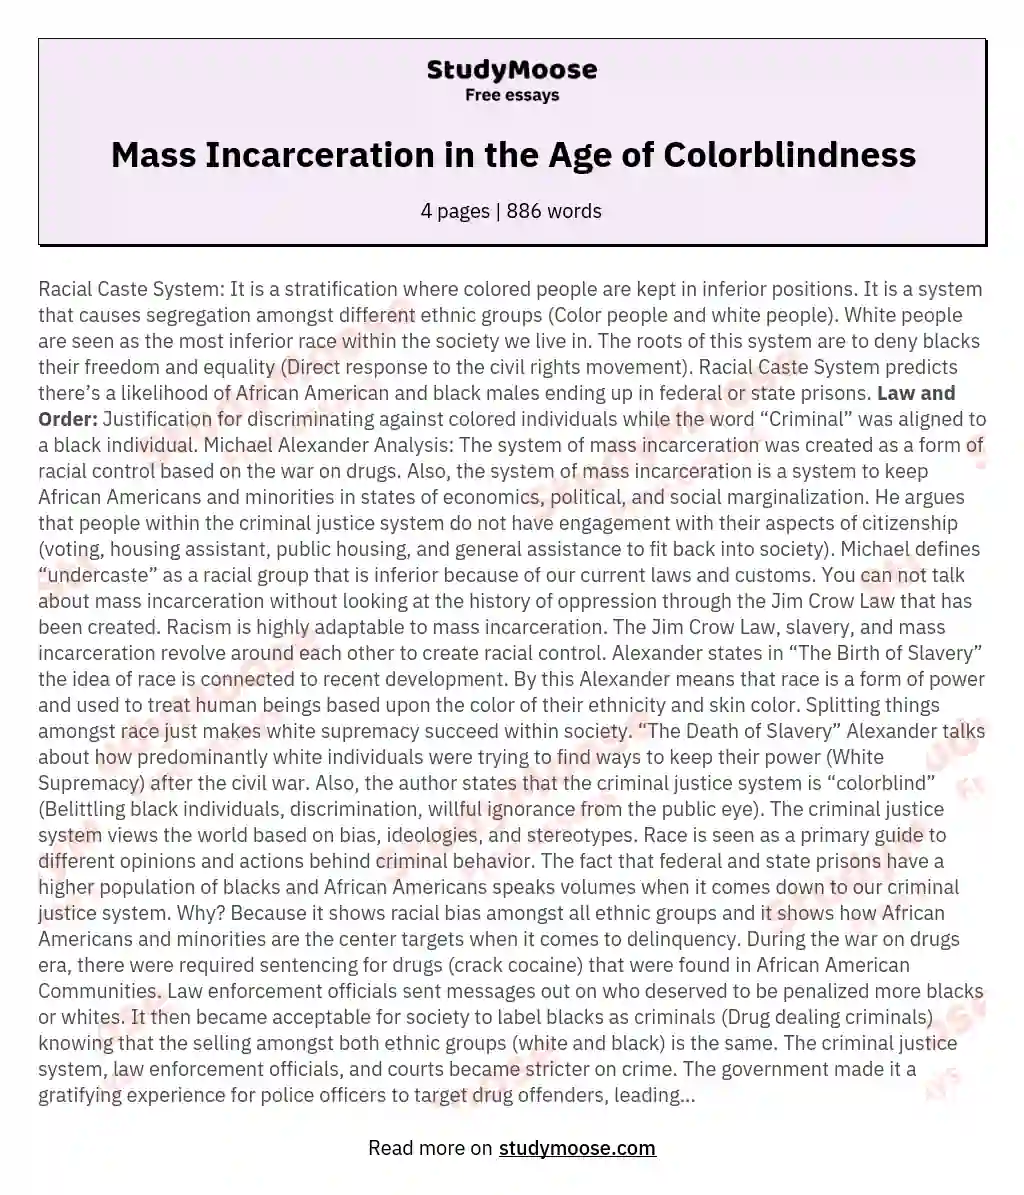 Mass Incarceration in the Age of Colorblindness essay